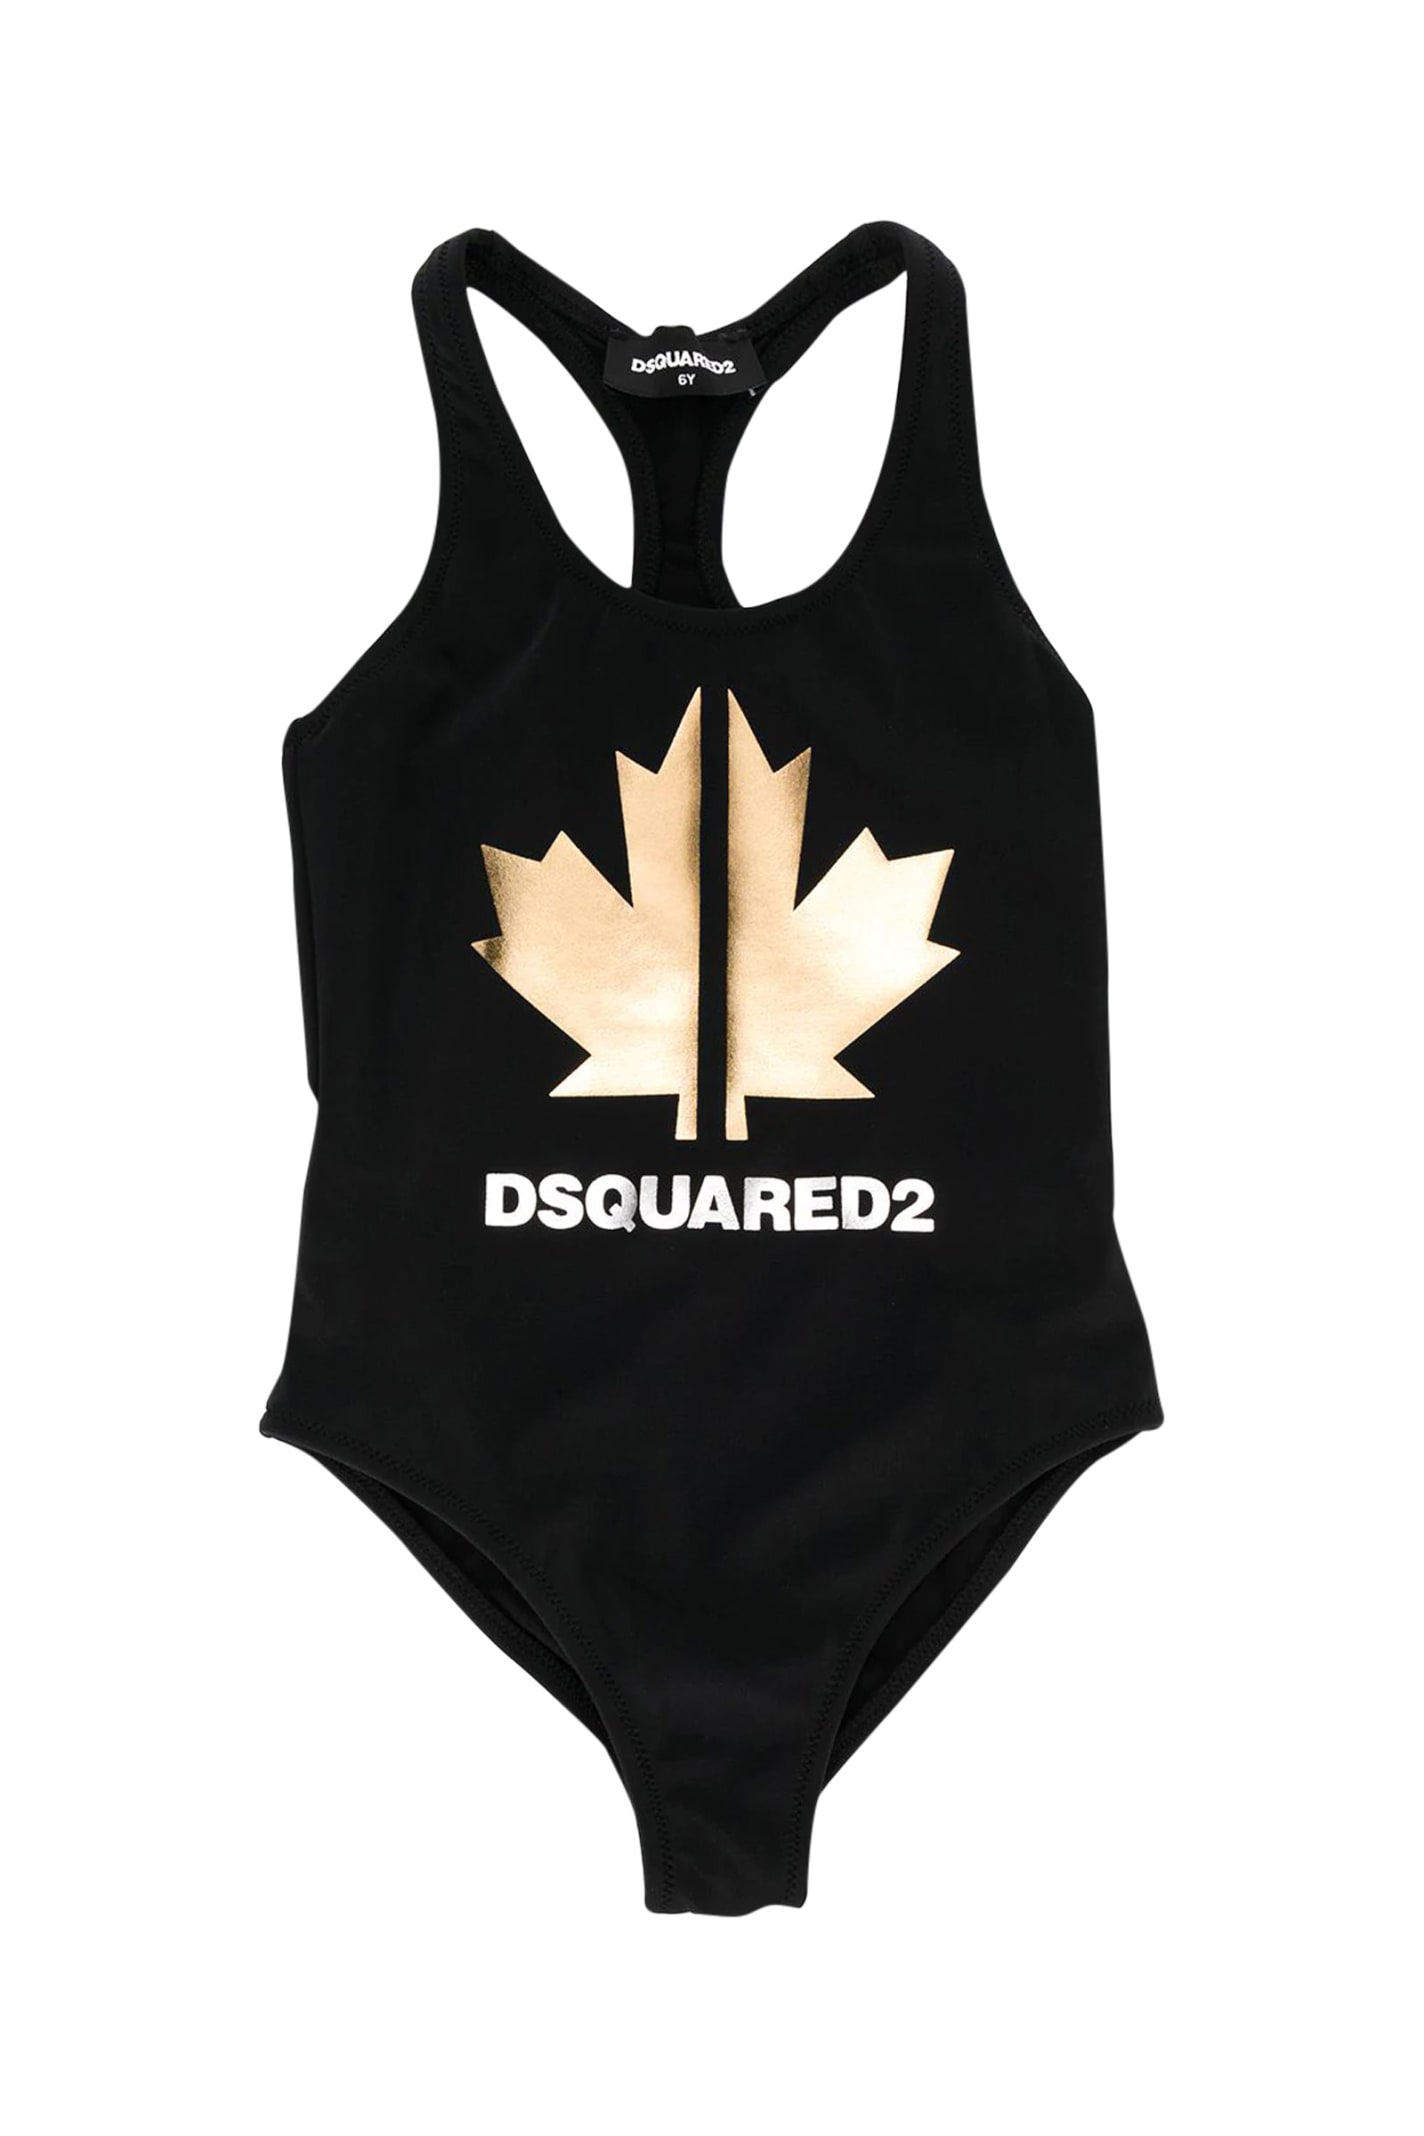 DSQUARED2 KIDS ONE-PIECE SWIMSUIT WITH PRINT,11207797